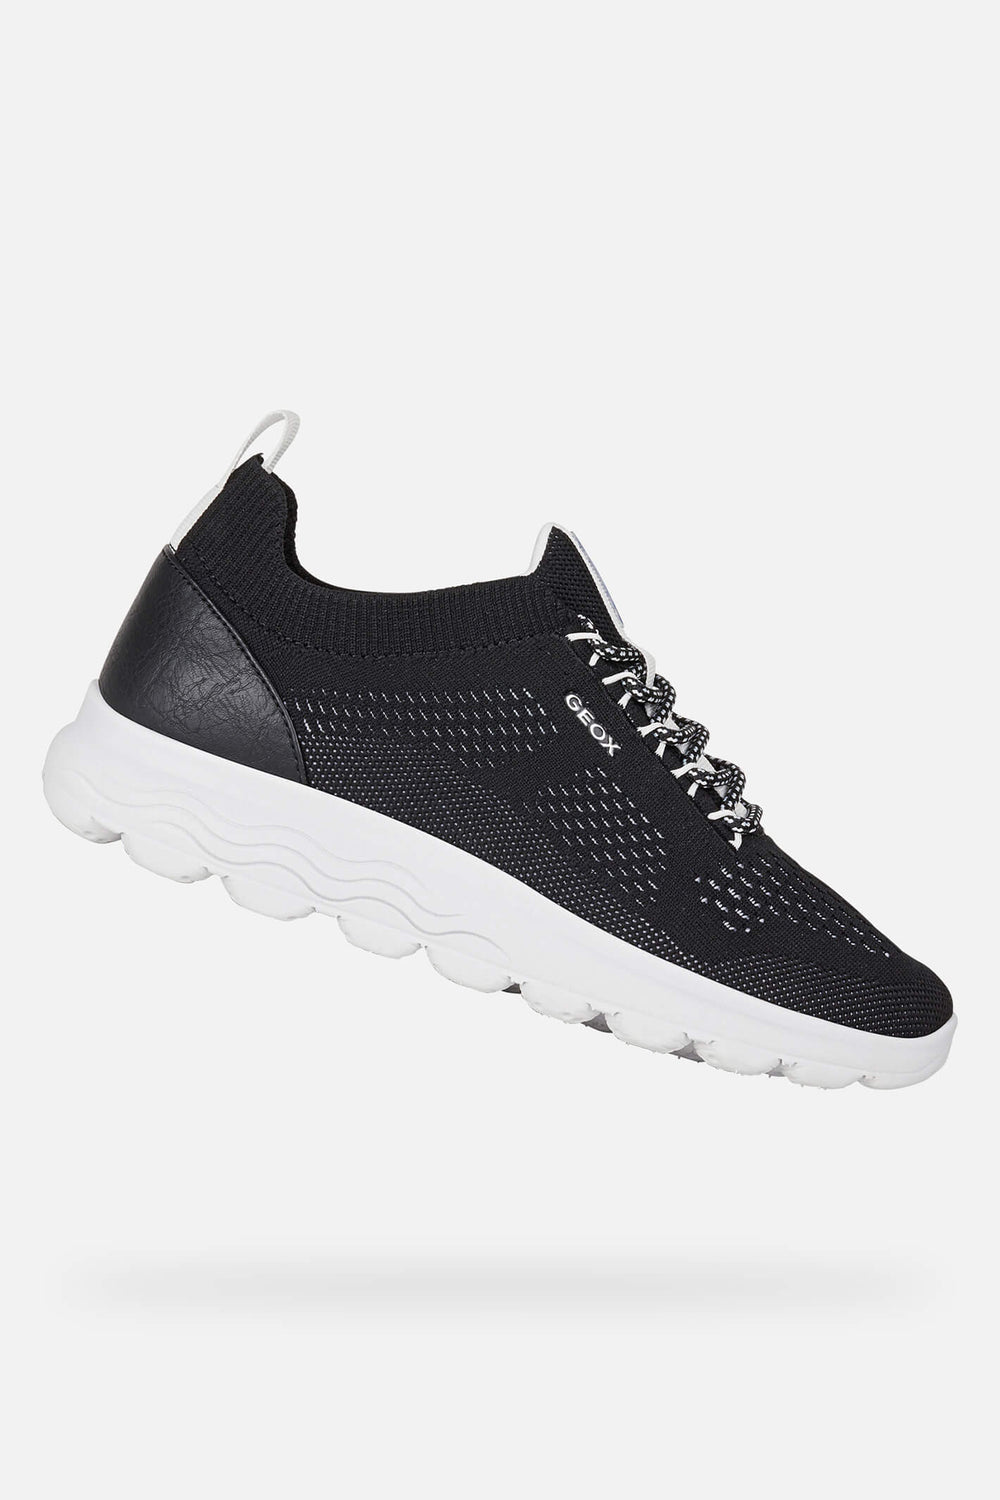 Geox Spherica D15NUA0006KC9999 Knitted Black Trainer - Shirley Allum Boutique